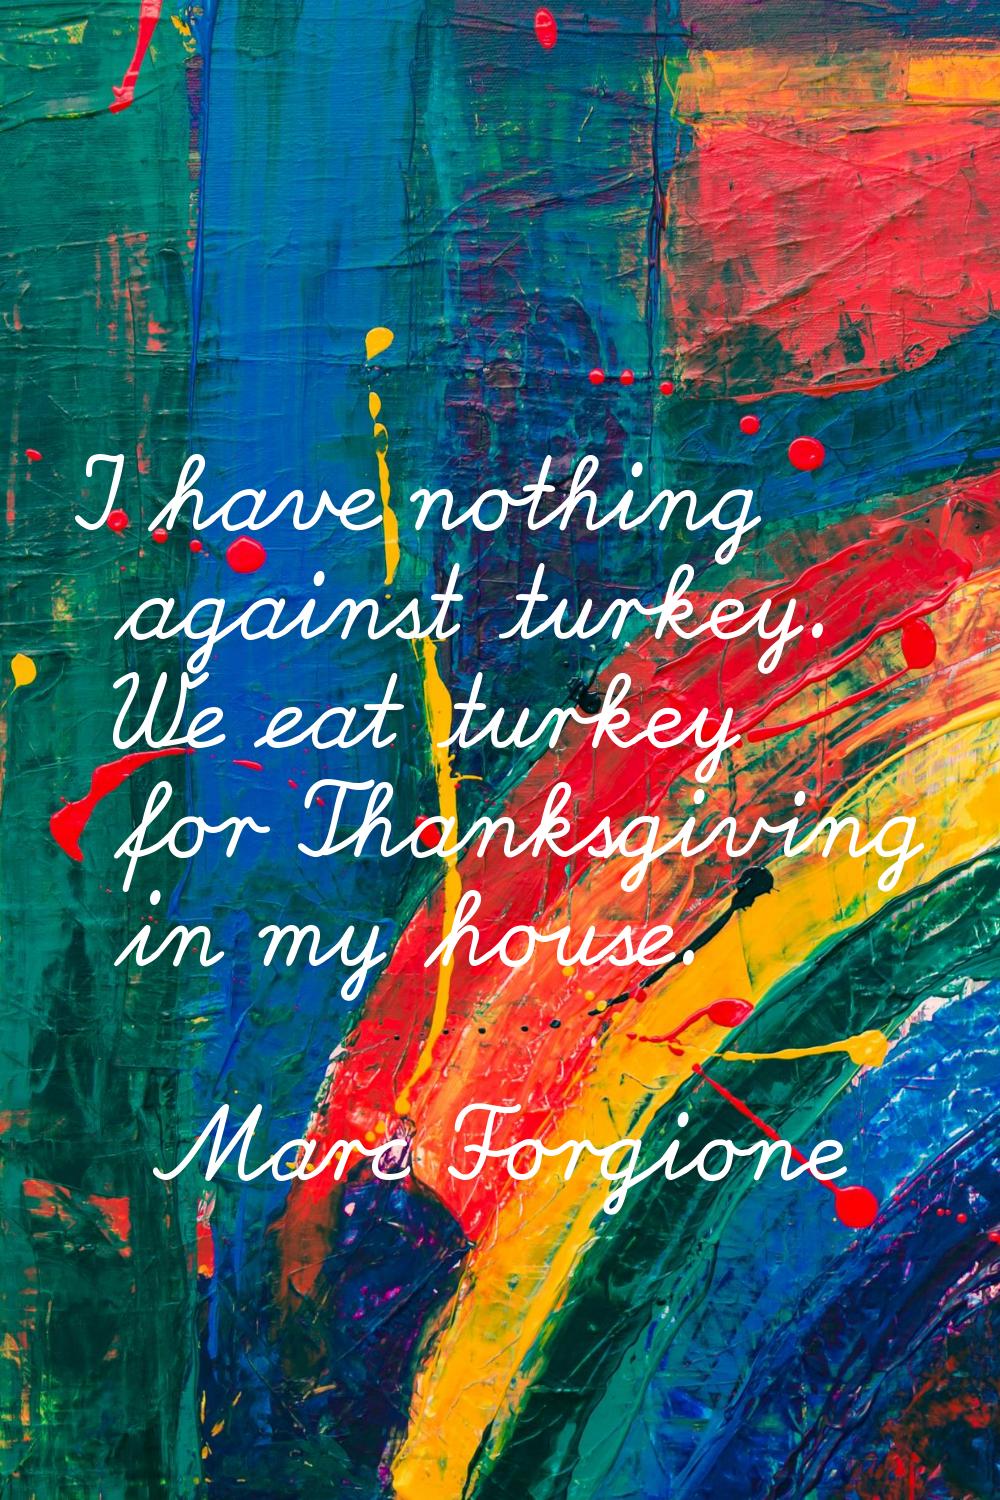 I have nothing against turkey. We eat turkey for Thanksgiving in my house.